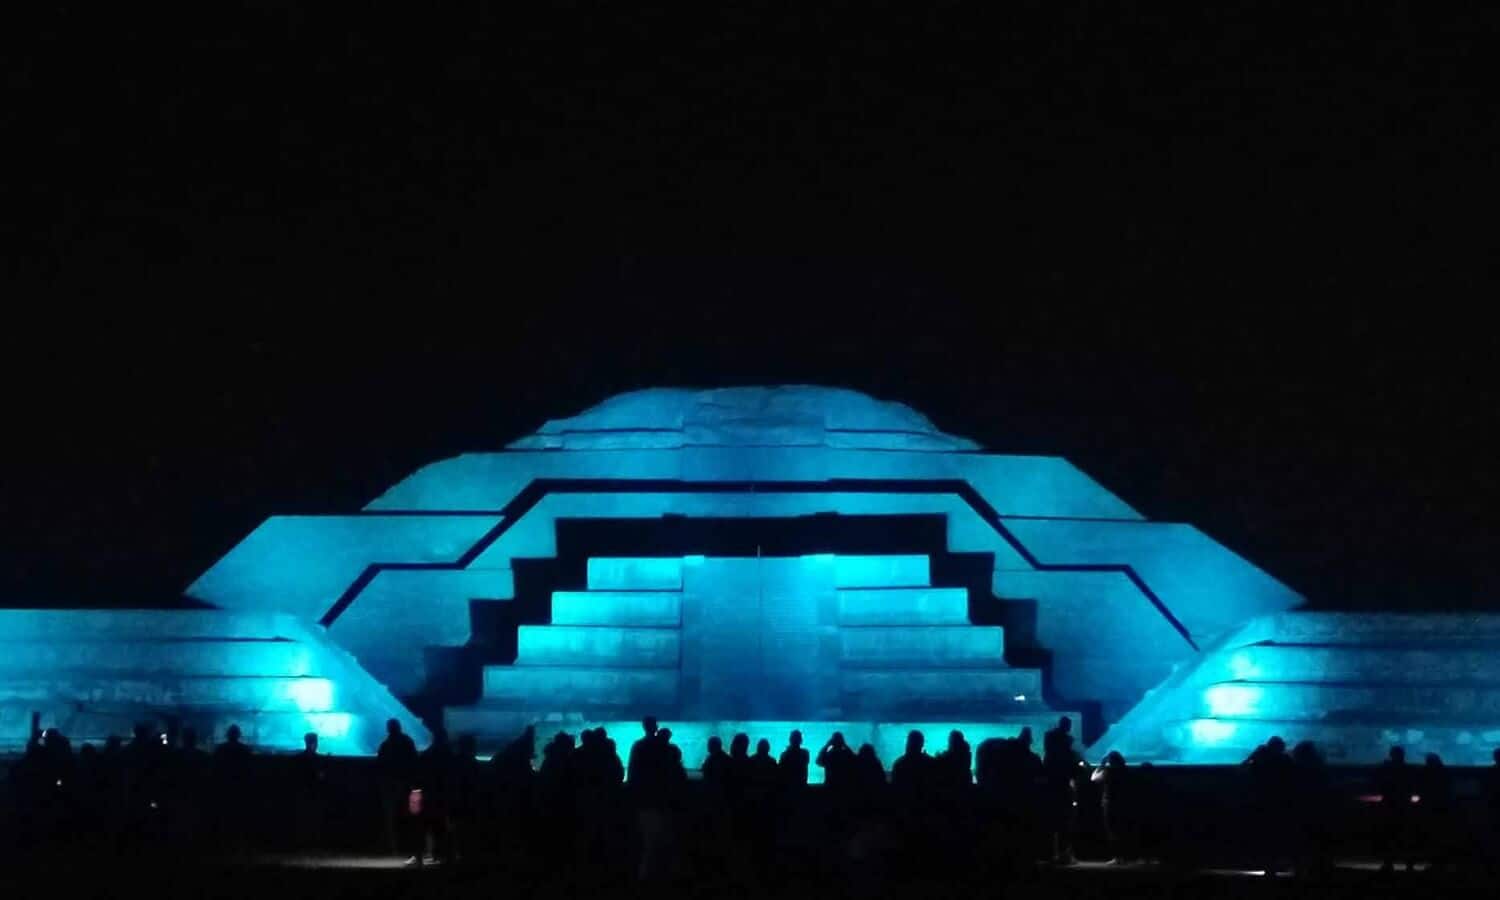 Pyramid Light Show In Mexico